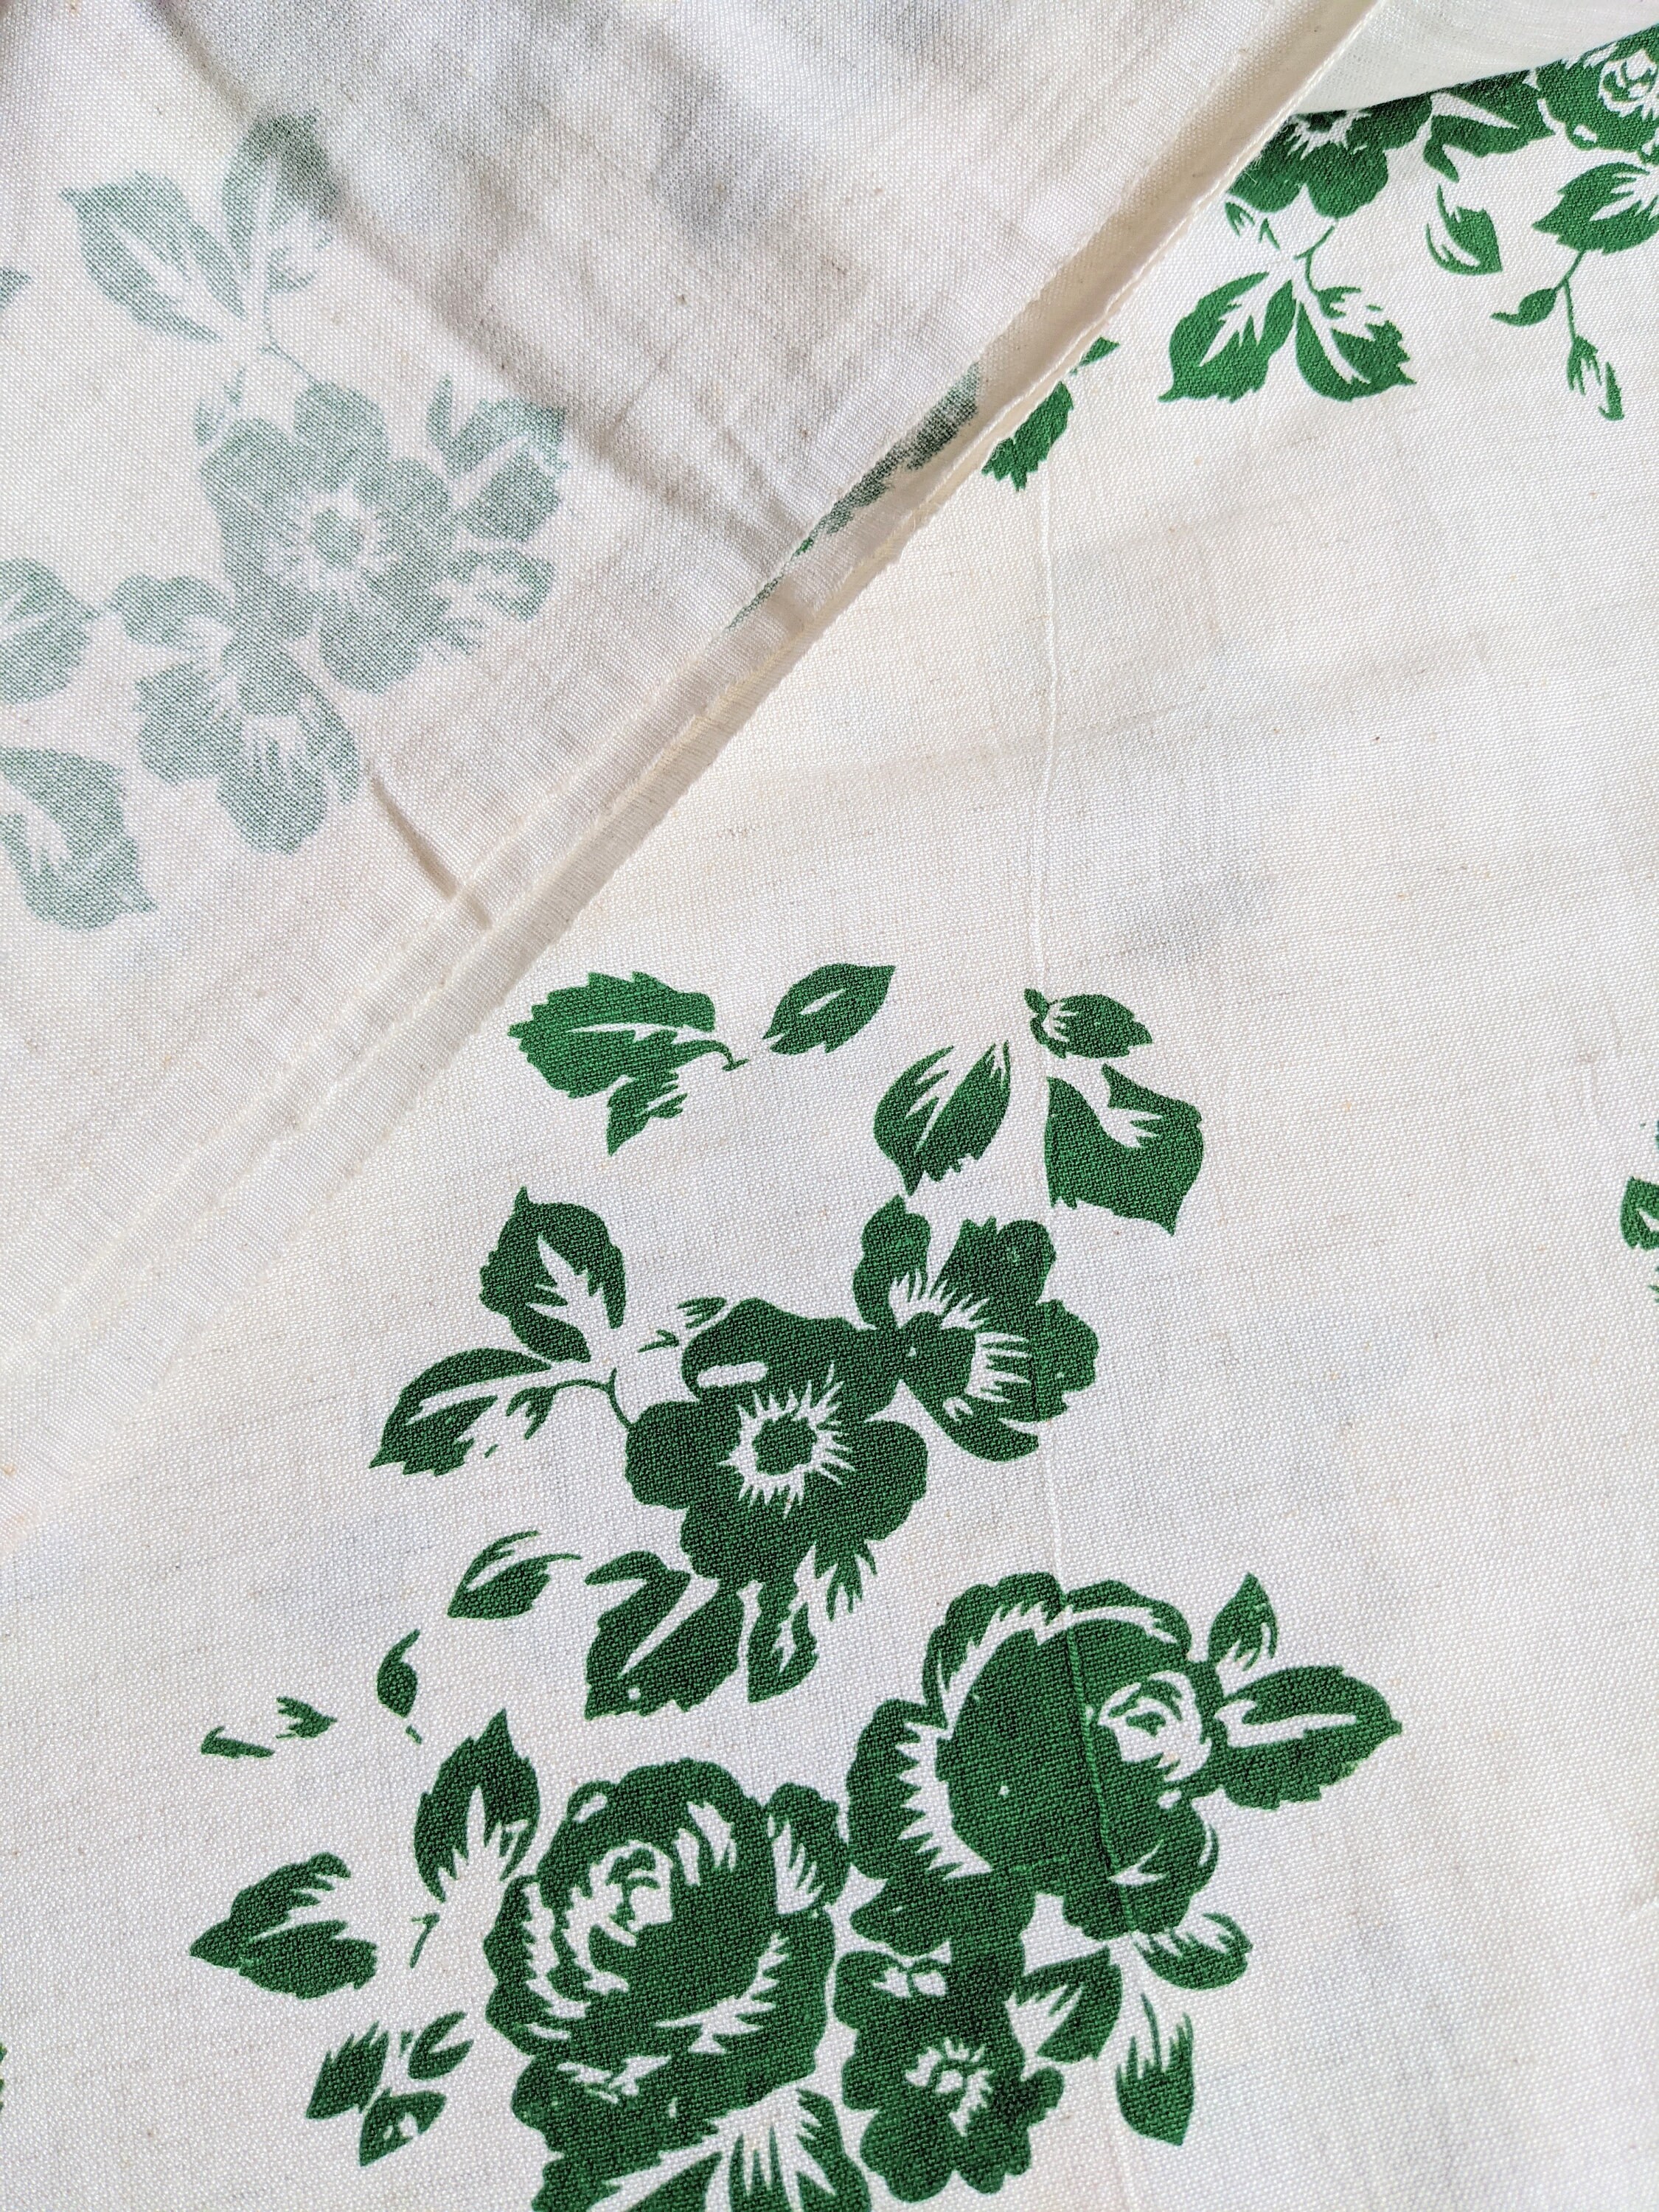 Off White and Green Floral Cotton Handloom Fabric Quilting - Etsy UK